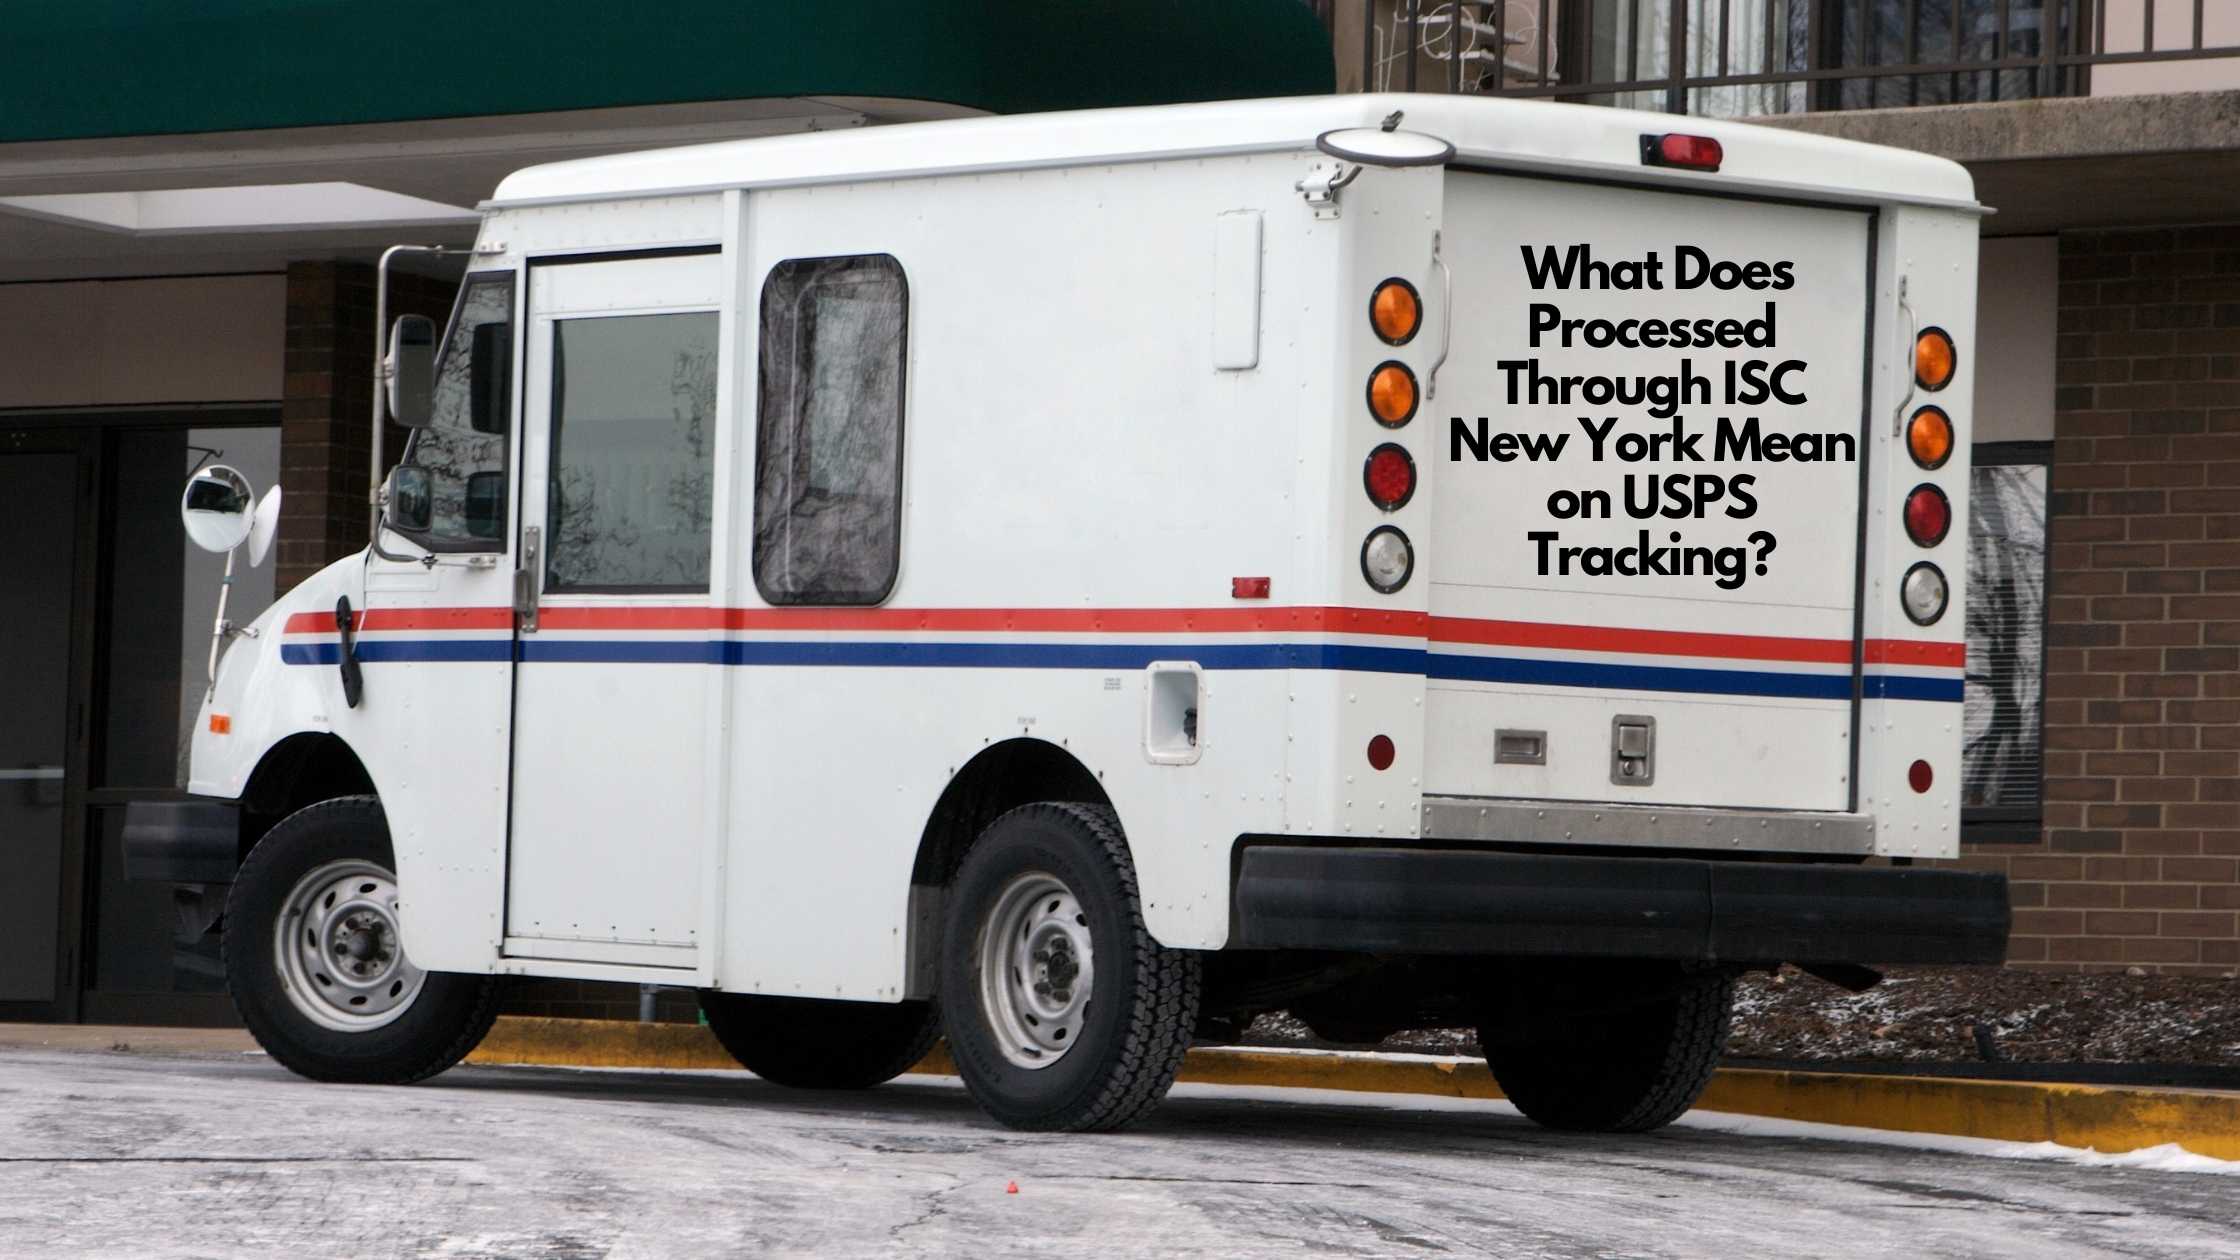 What Does Processed Through ISC New York Mean on USPS Tracking?